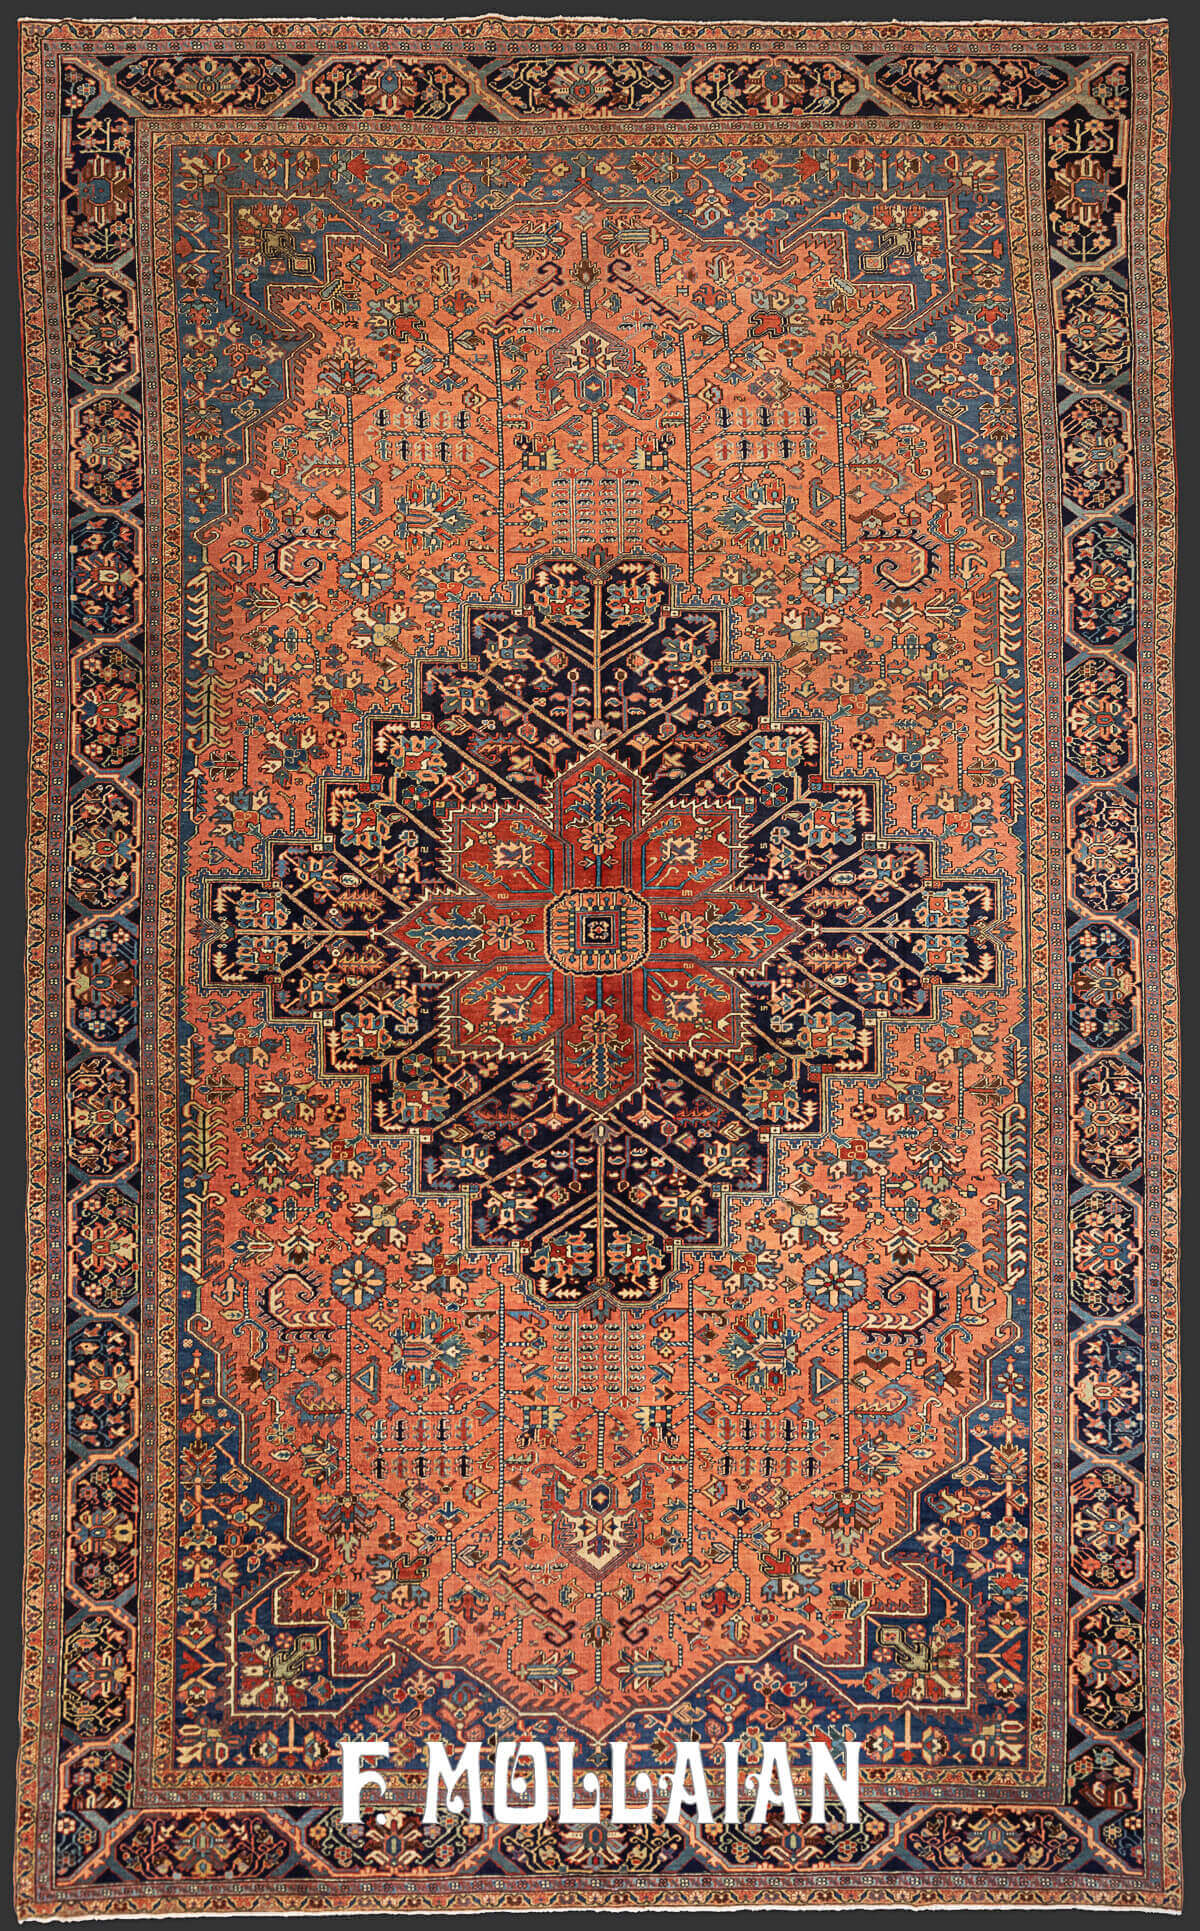 Very Large Hand-Knotted Heriz Antique Persian Carpet n°:12876718